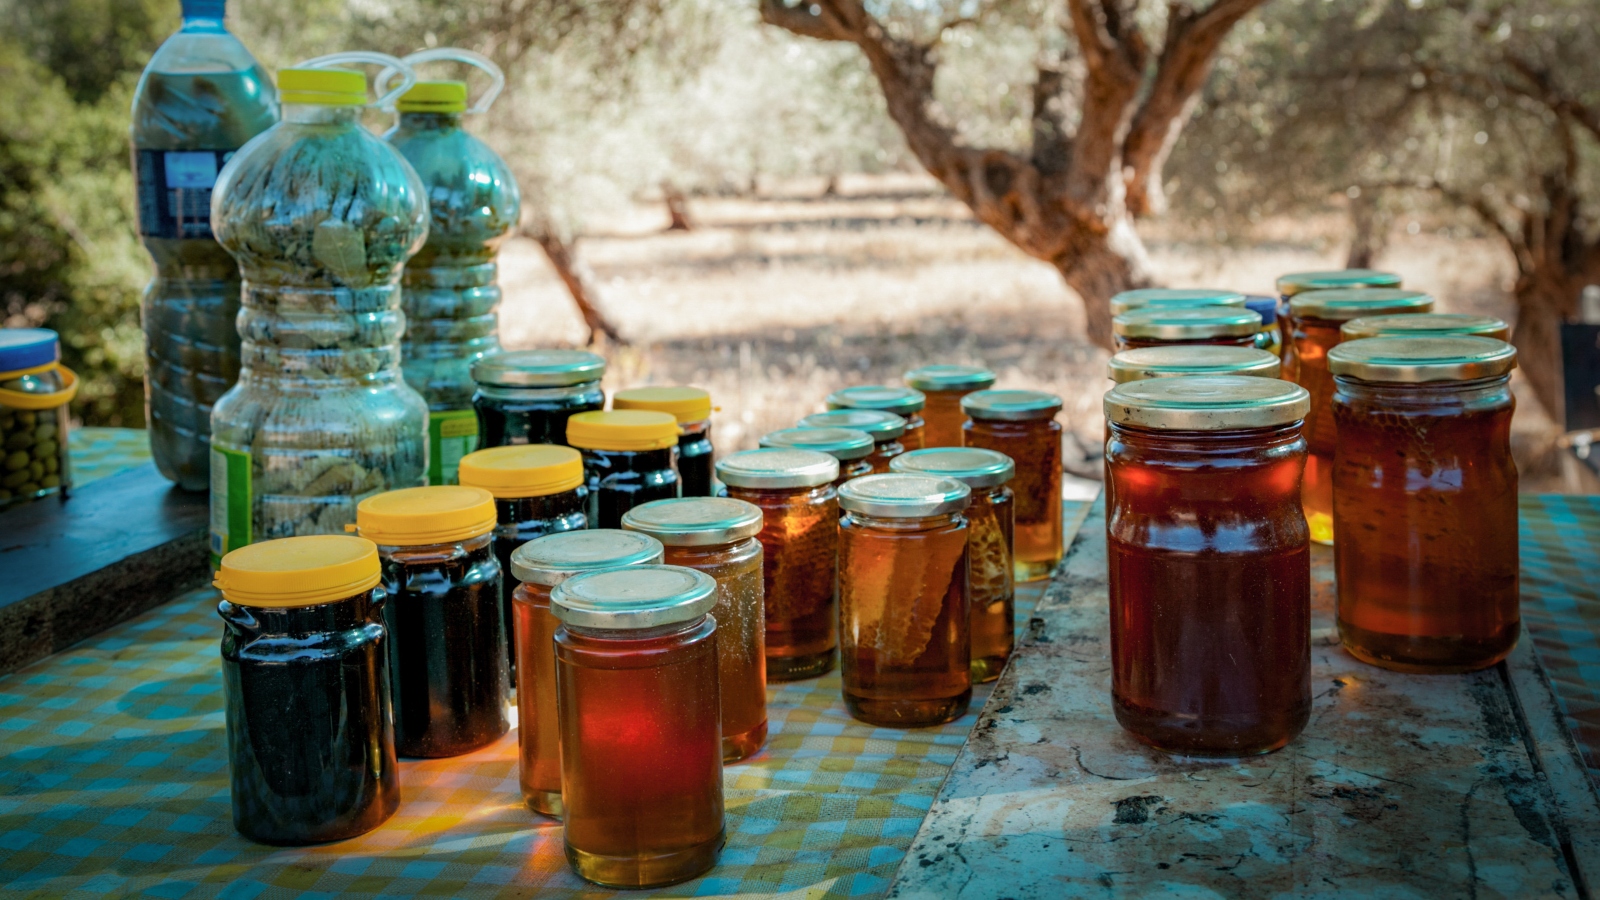 Honey sold at a roadside stand by Israeli Druzein the Carmel area of northern Israel. Photo by Anat Hermony/FLASH90